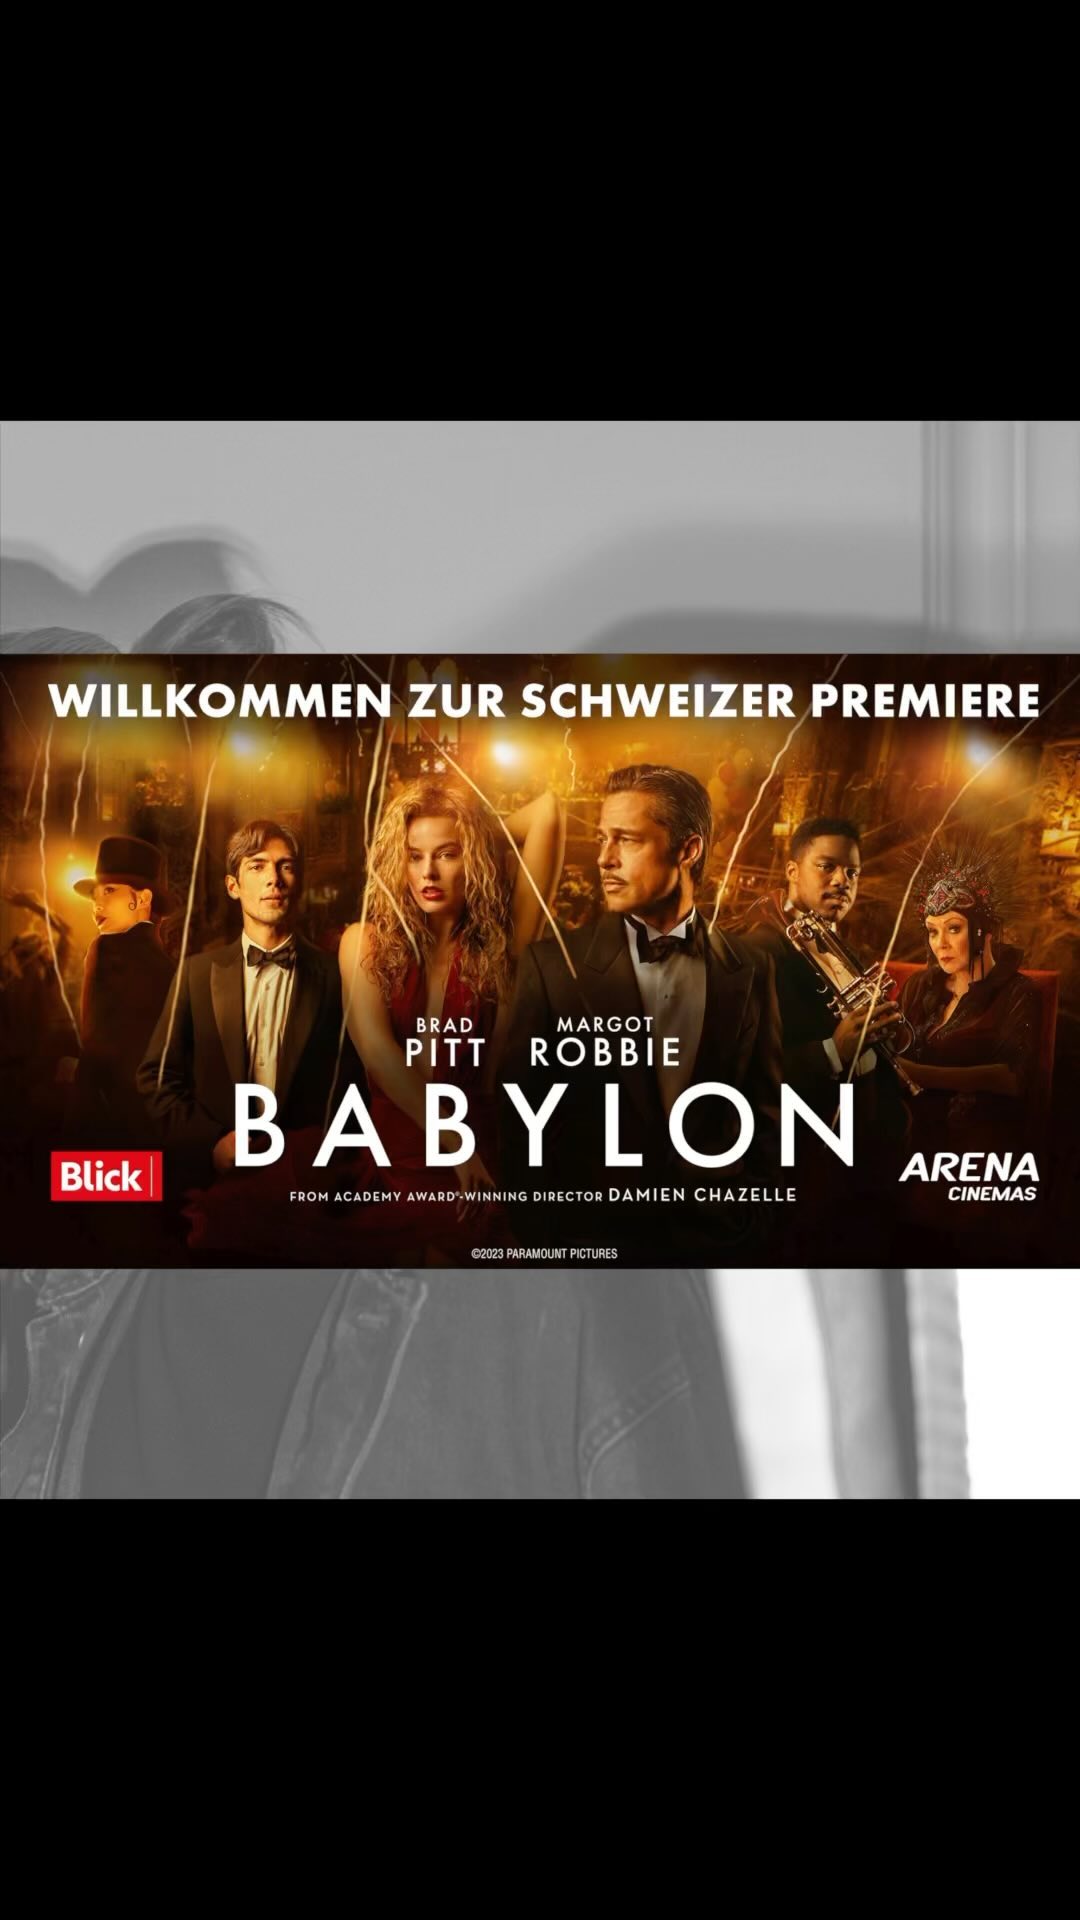 New work for @paramountswiss 

we captured a few moments from the
@babylonmovie Swiss Premiere in Zurich @arenacinemaszh @ruesterei 

D.O.P: Ian Tila & @gbvideography 
Edit: Ian Tila
Color Grading: @yar.color
Trailer Footage: @paramountpics